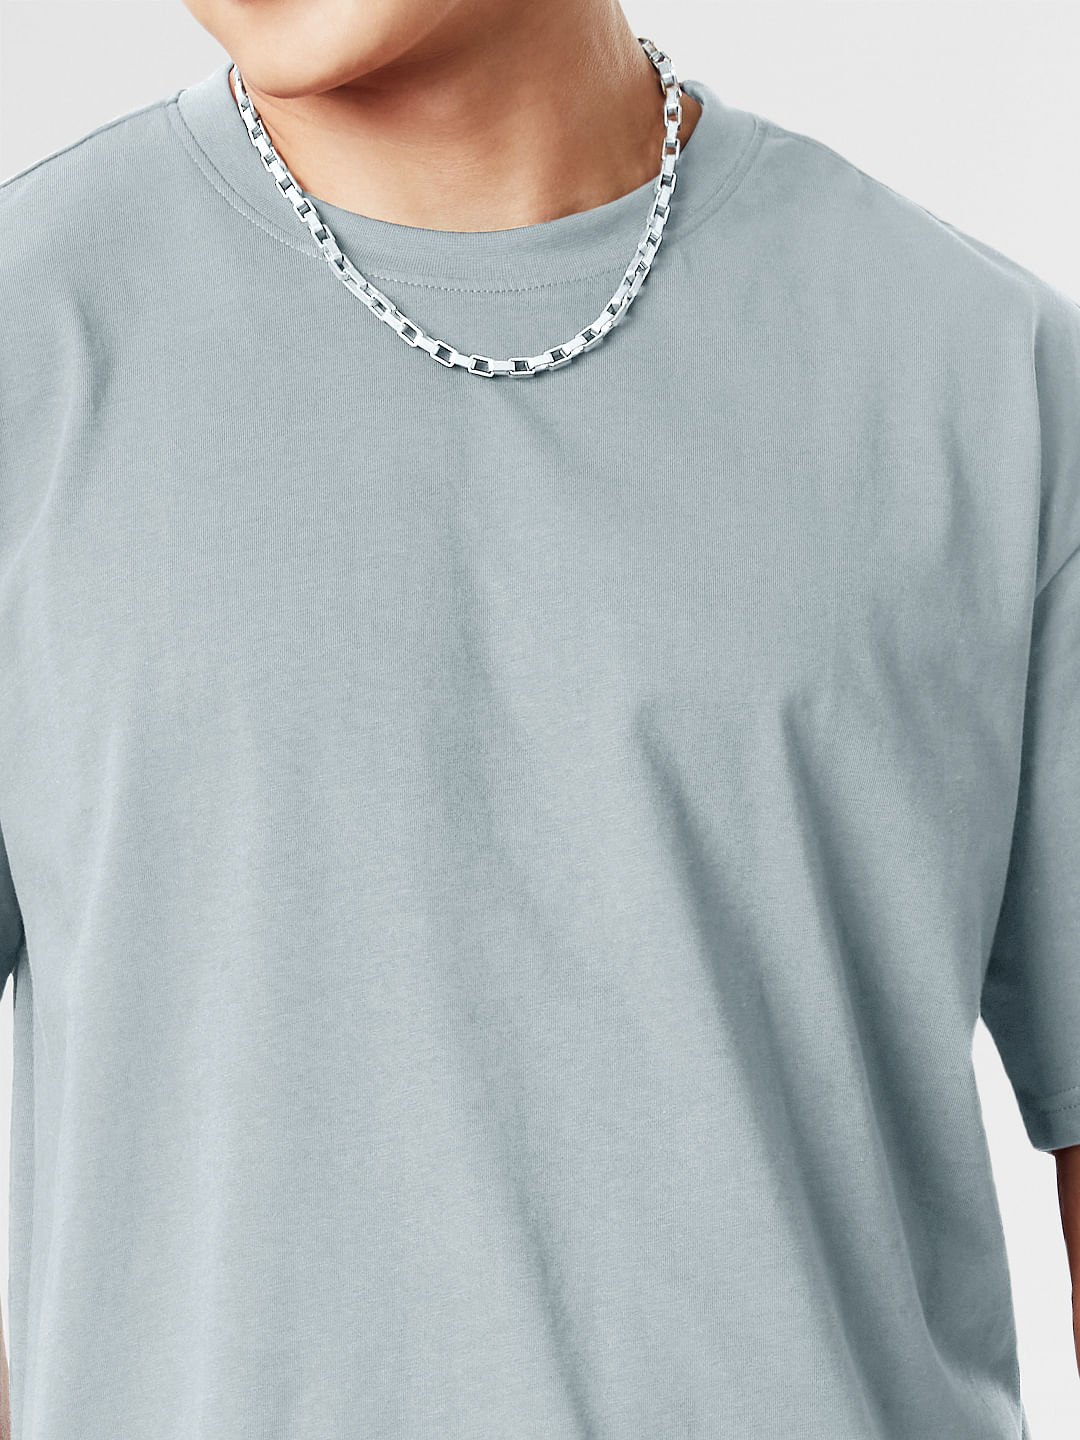 Buy Solids: Pearl Grey Oversized T-Shirts Online